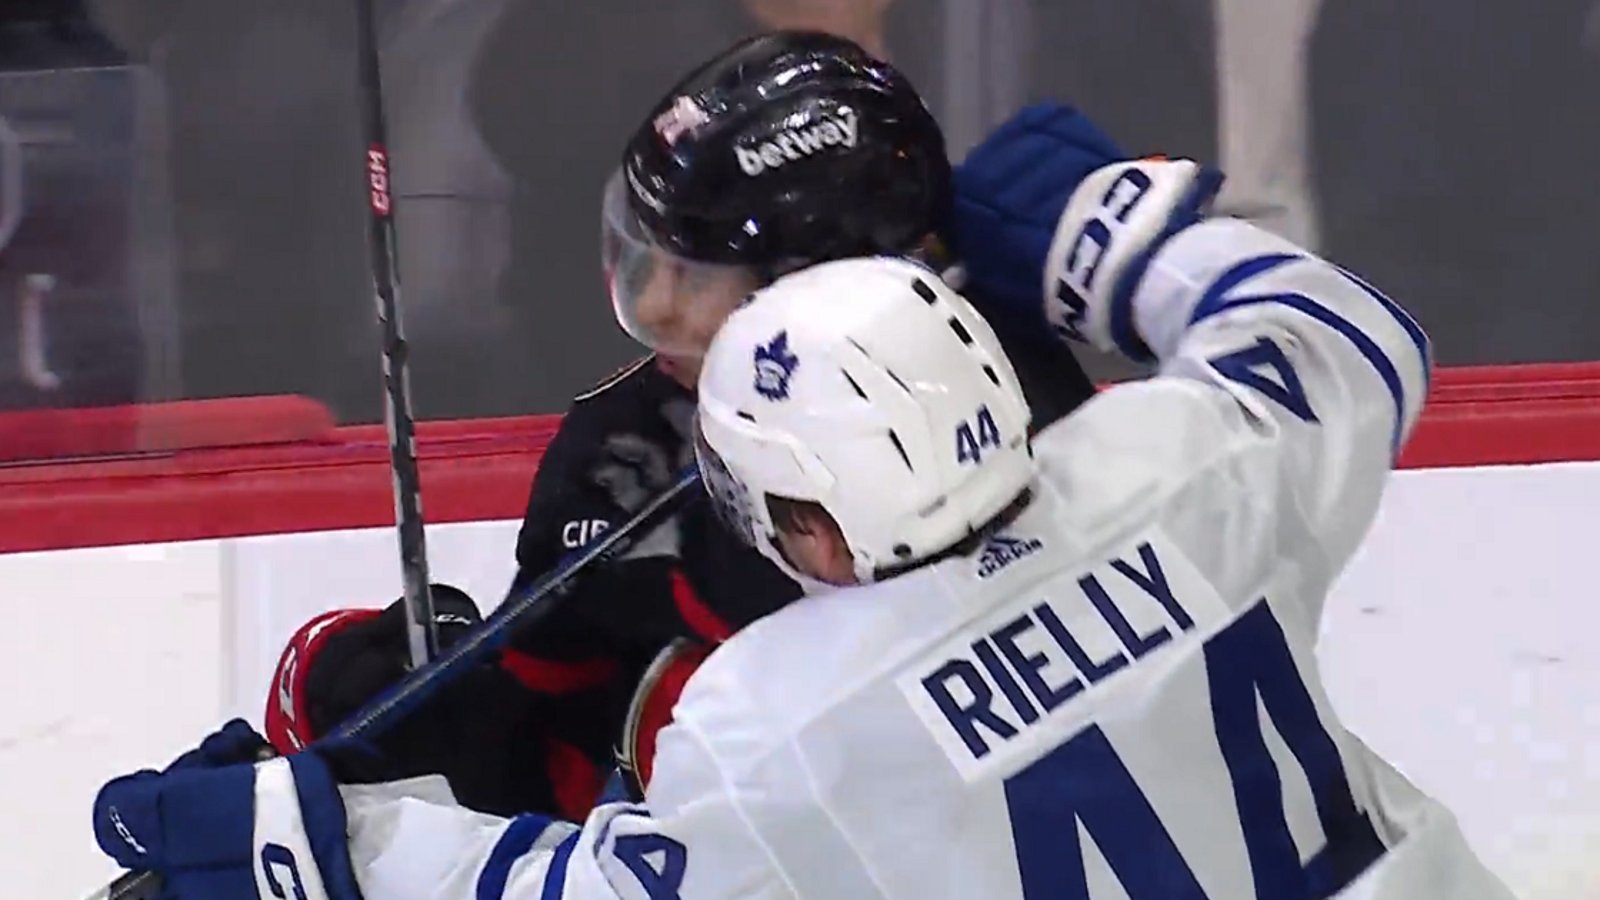 Morgan Rielly ejected with 5 seconds left in the game.